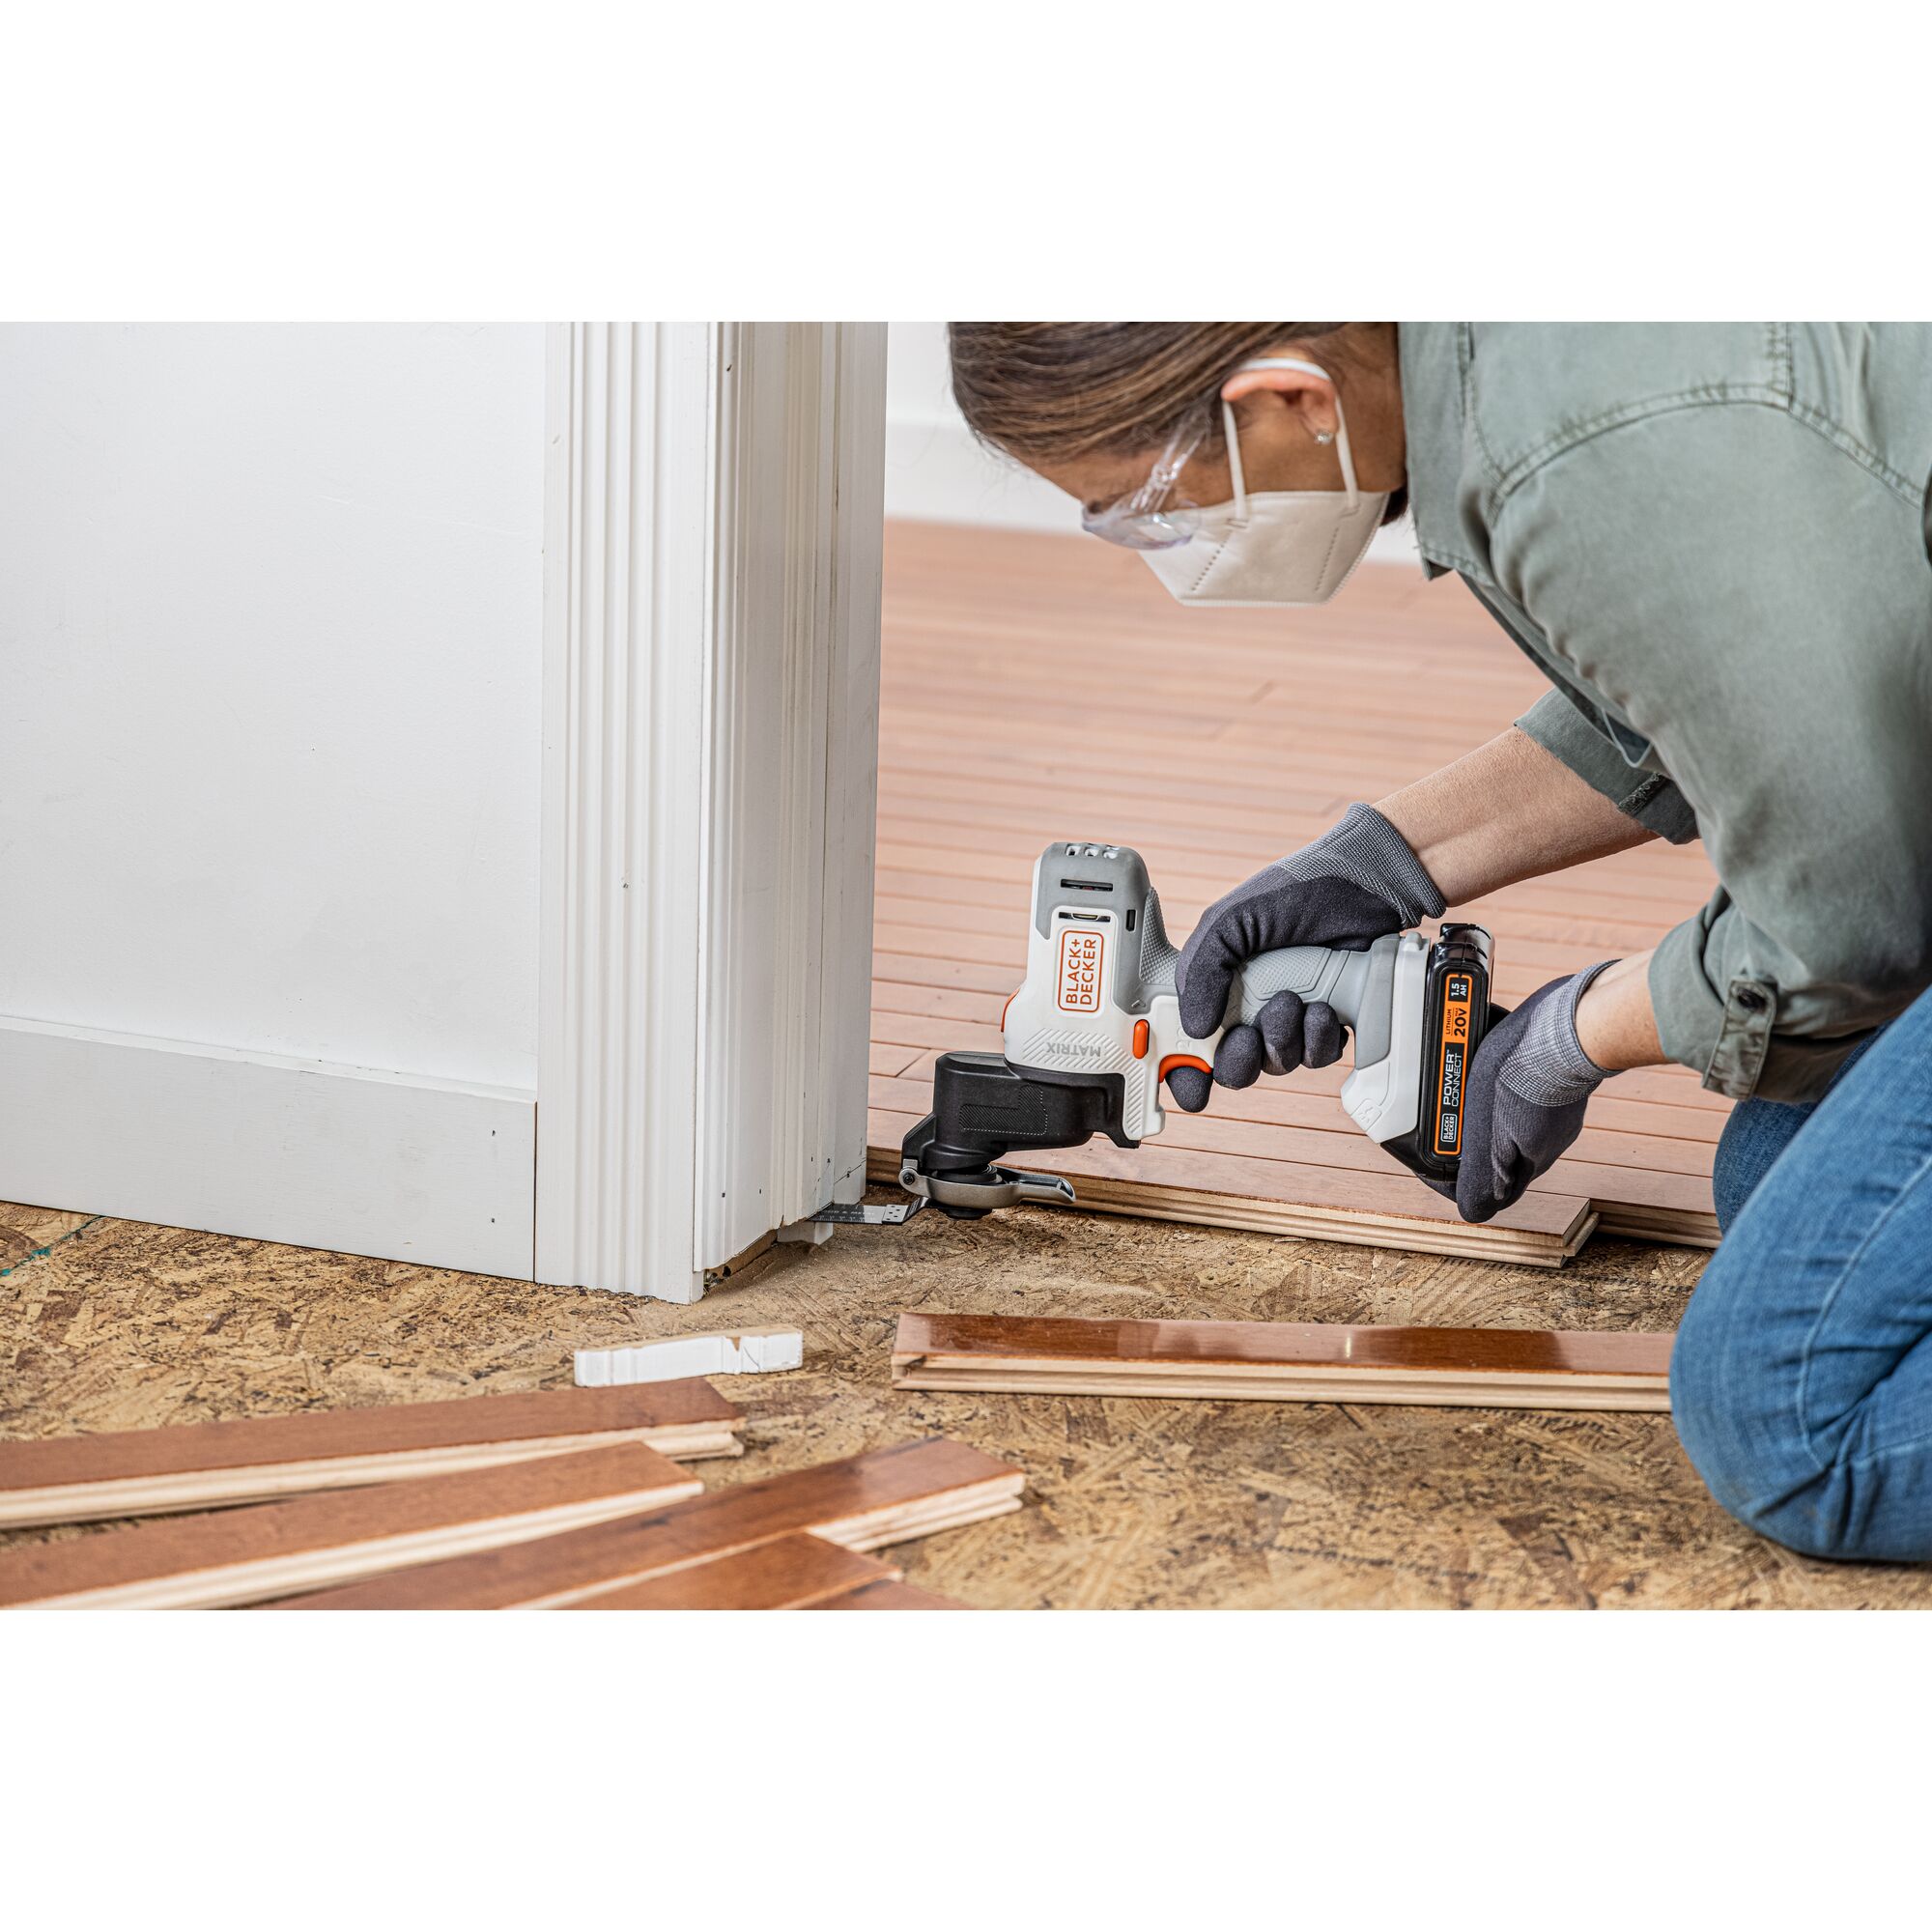 Person uses the BLACK+DECKER MATRIX oscillating multi-tool attachment to cut trim and install flooring underneath